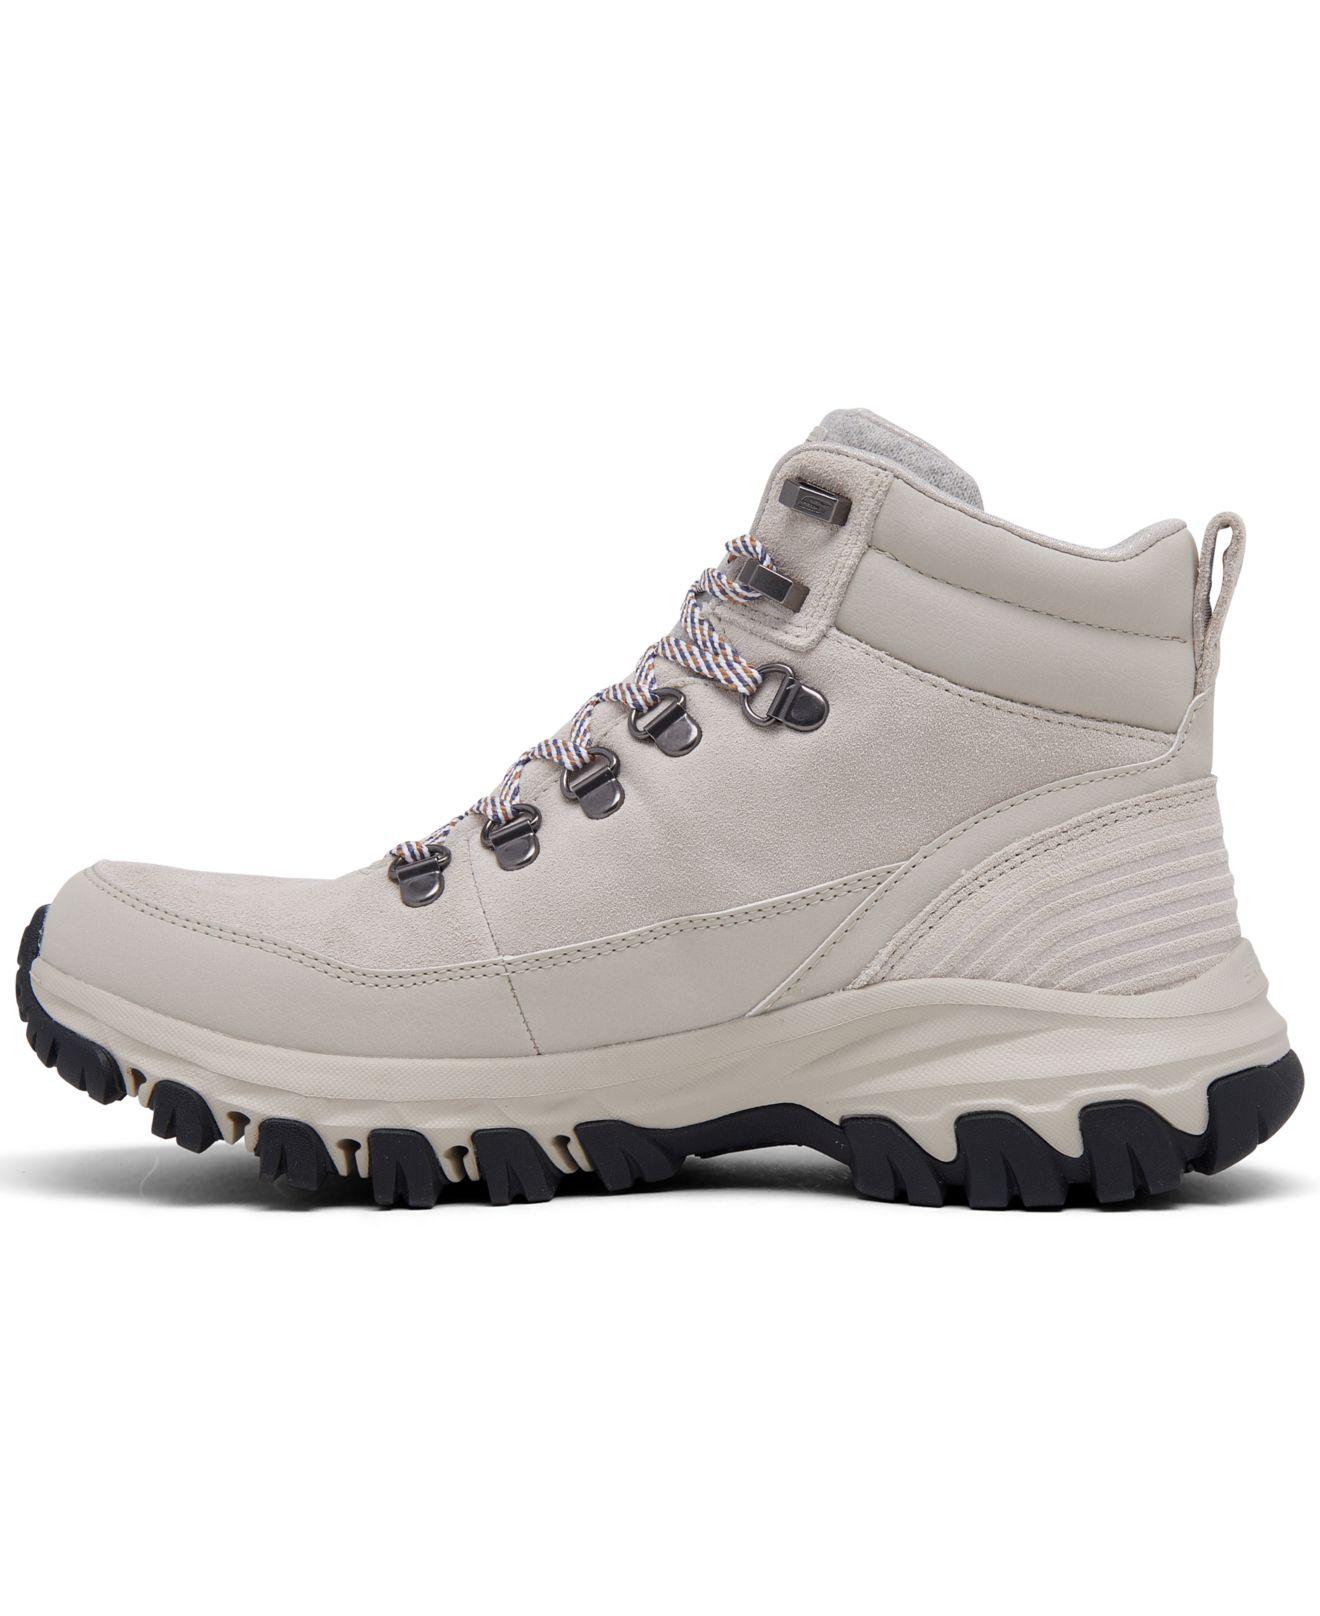 Skechers Relaxed Fit - High Profile Hiking Sneaker Boots Finish Line in Gray | Lyst